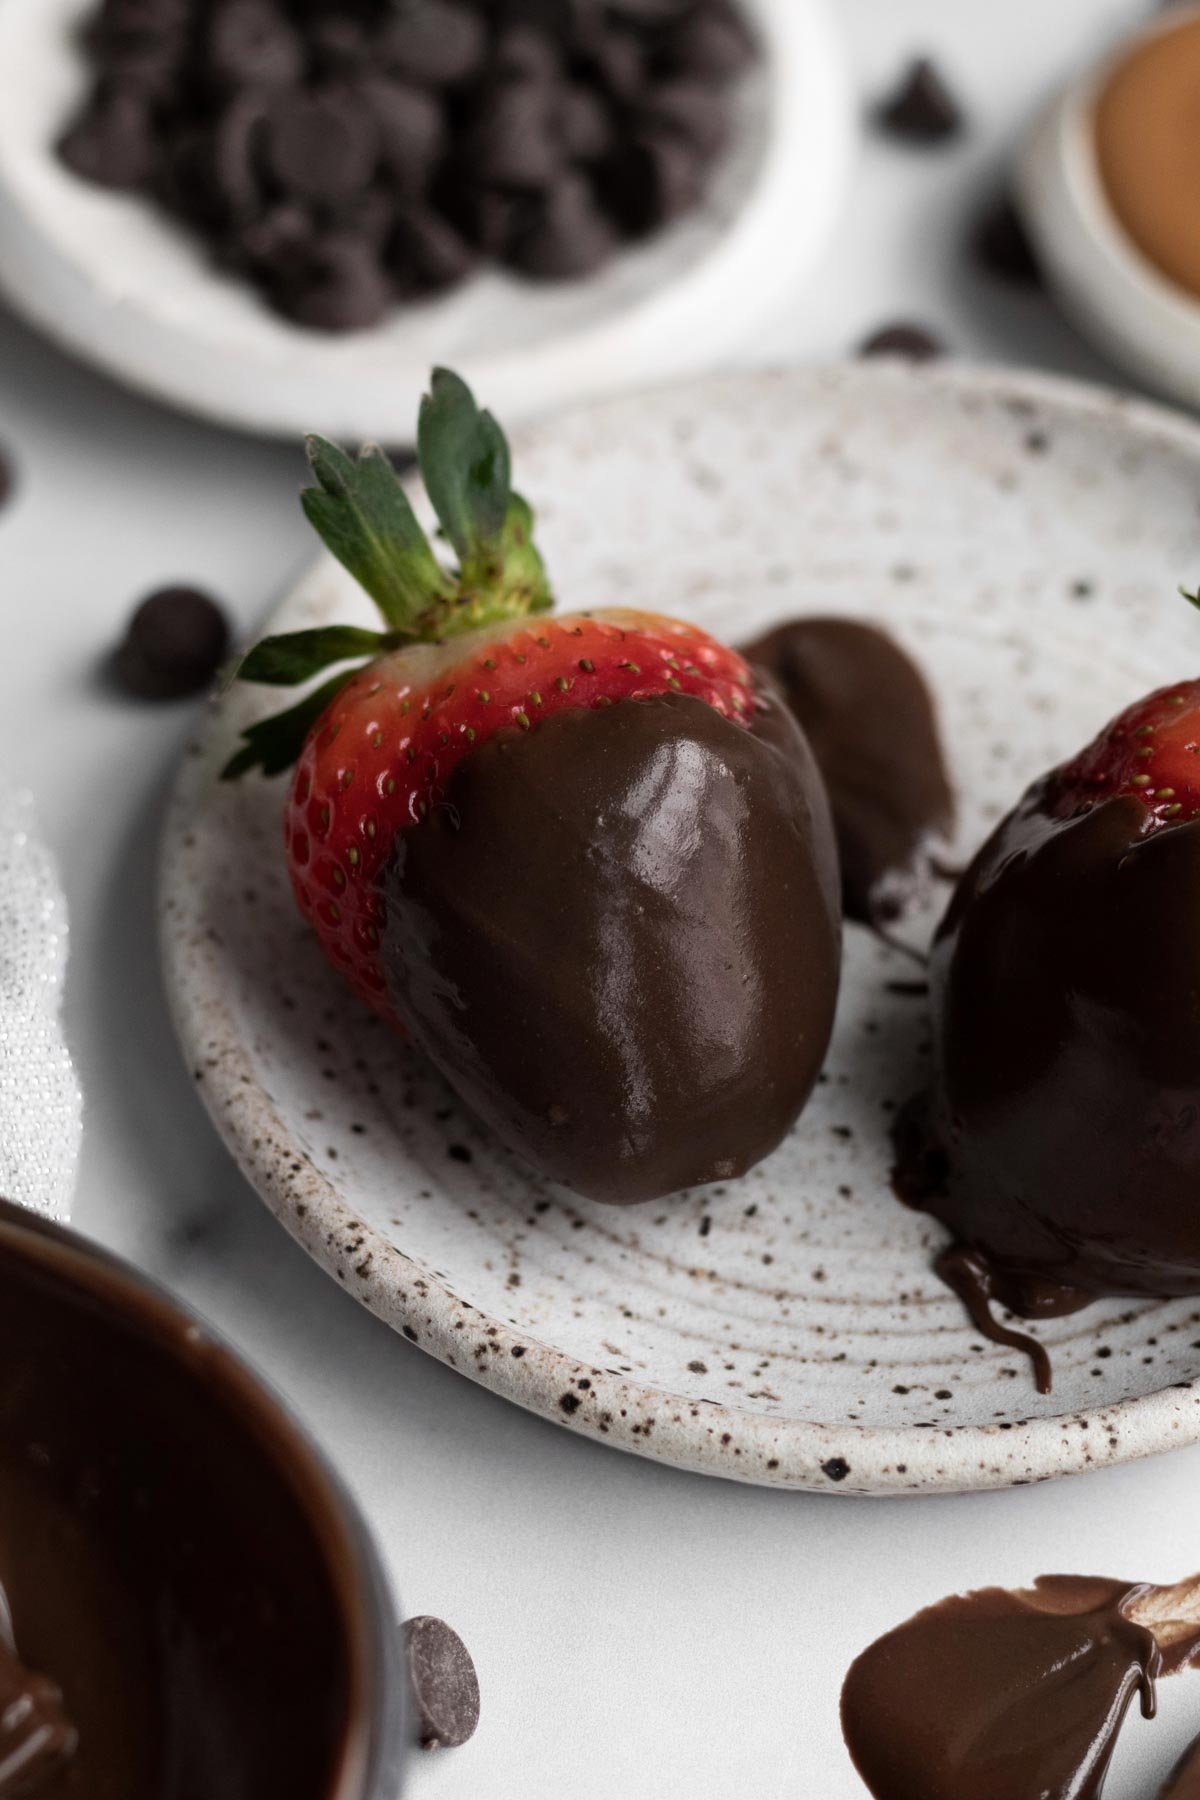 Silky and delicious Nut Free Chocolate Spread covers this fresh red strawberry.